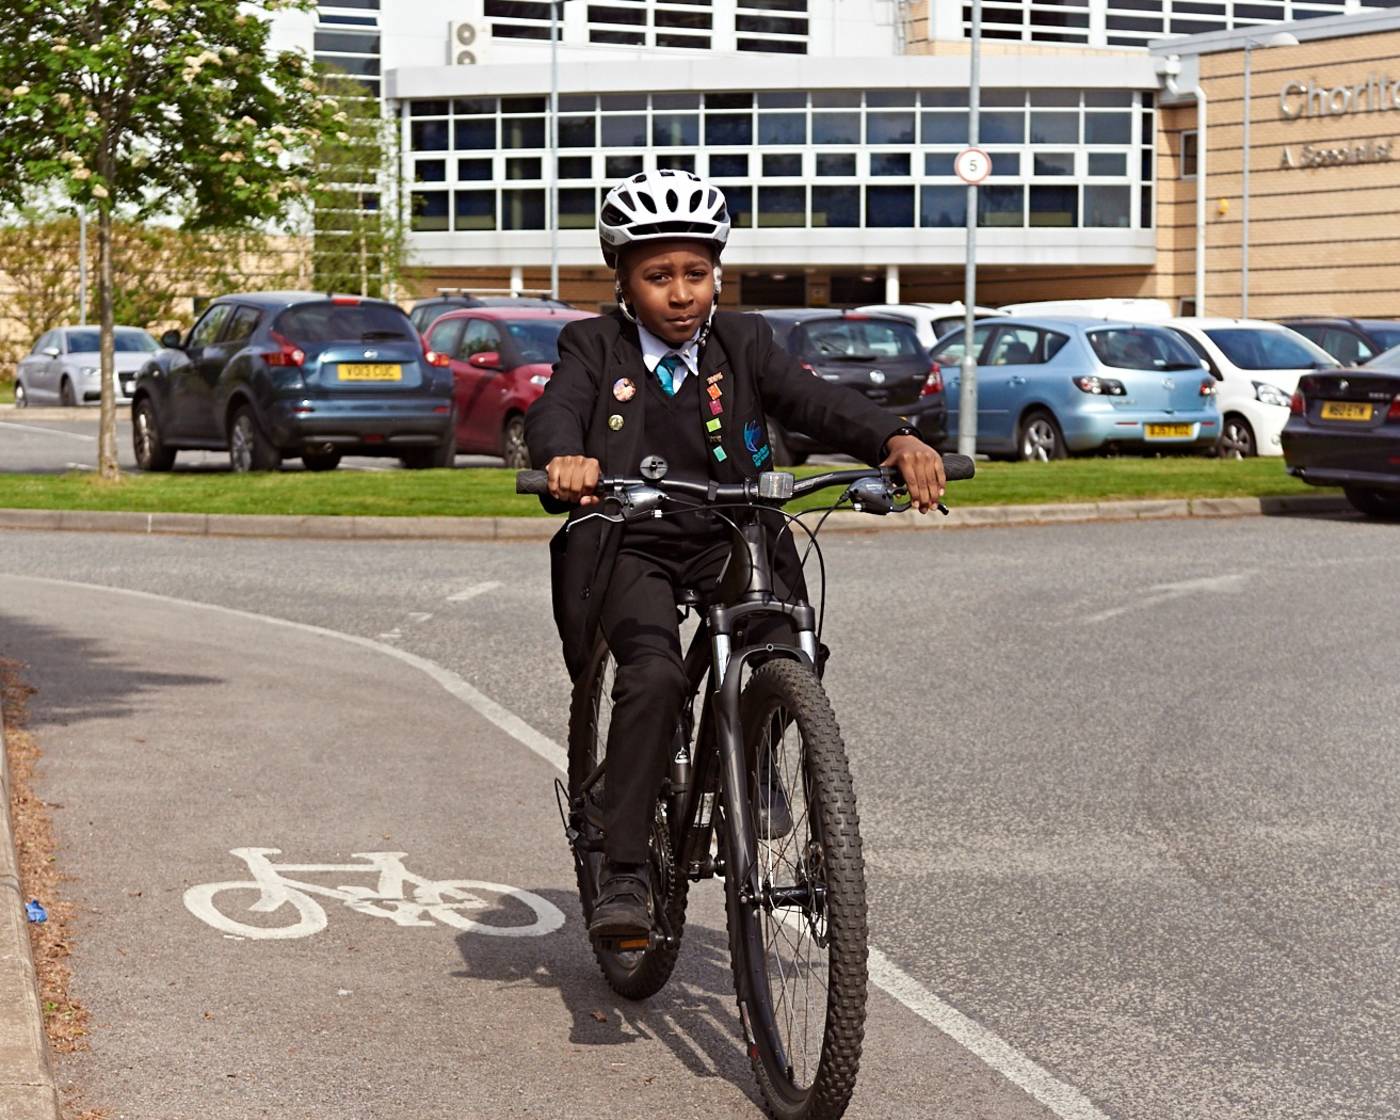 Image of school child cycling on a cycle lane